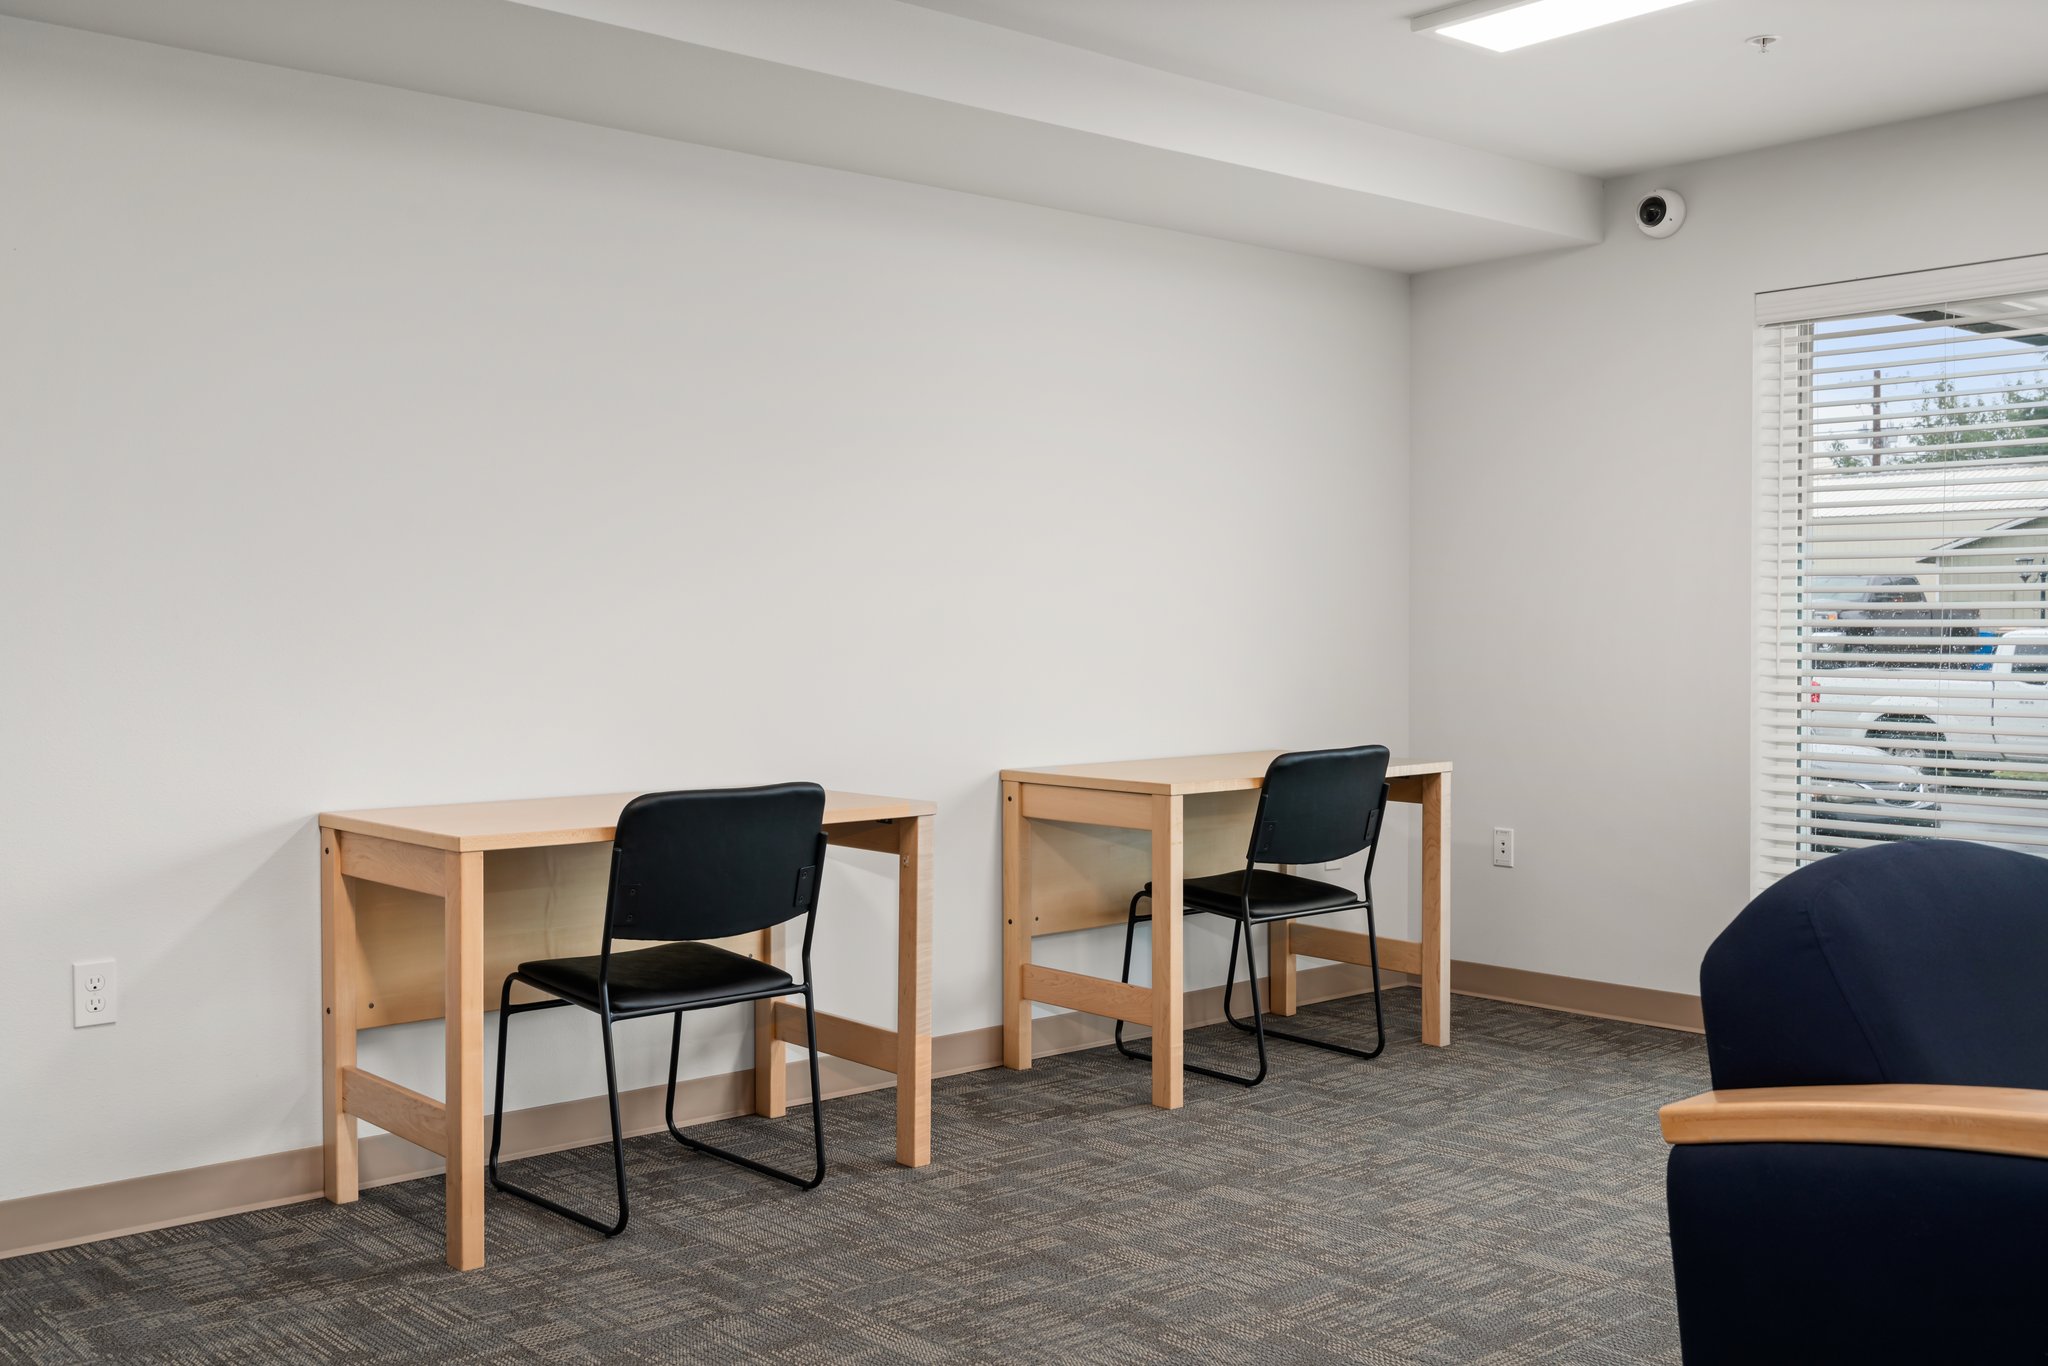 The community room has a pair of desks for collaborative study sessions.